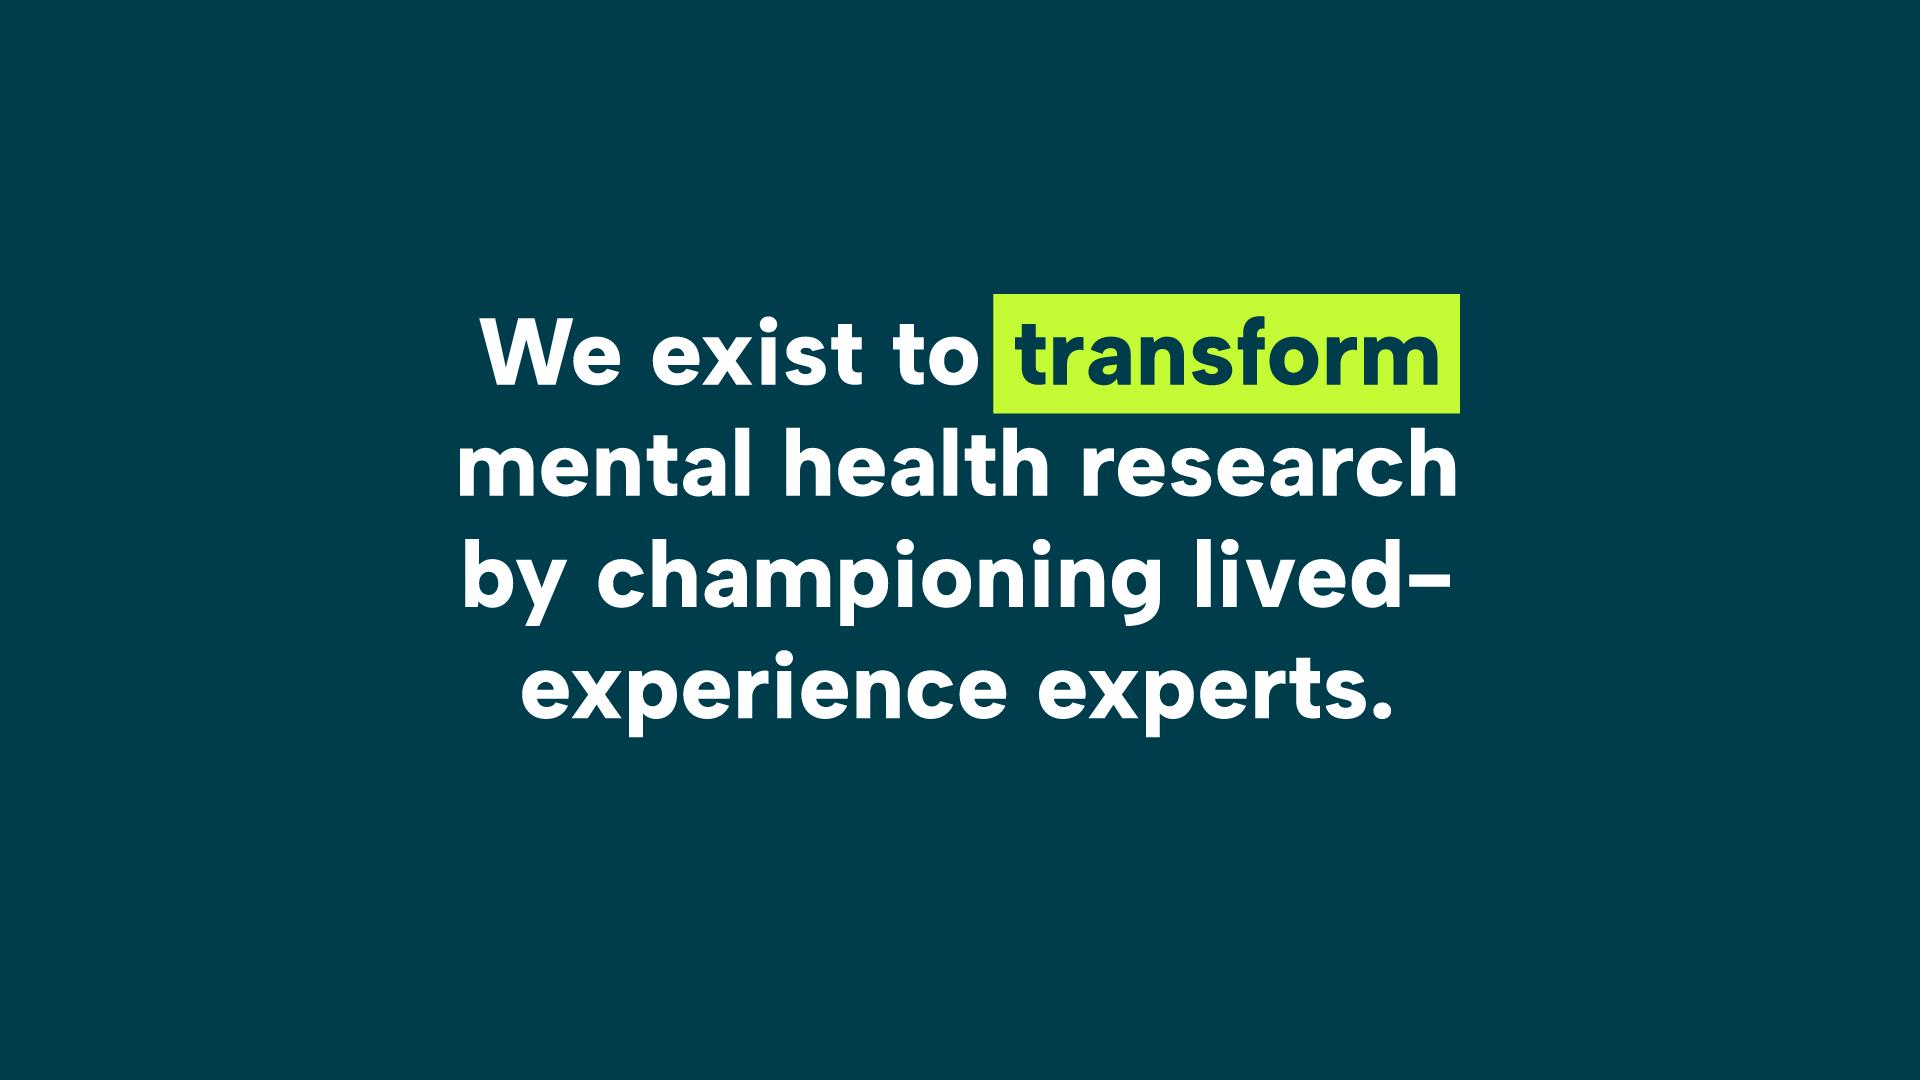 Image for This image is promoting the idea of using lived-experience experts to transform mental health research. Full Text: We exist to transform mental health research by championing lived- experience experts.